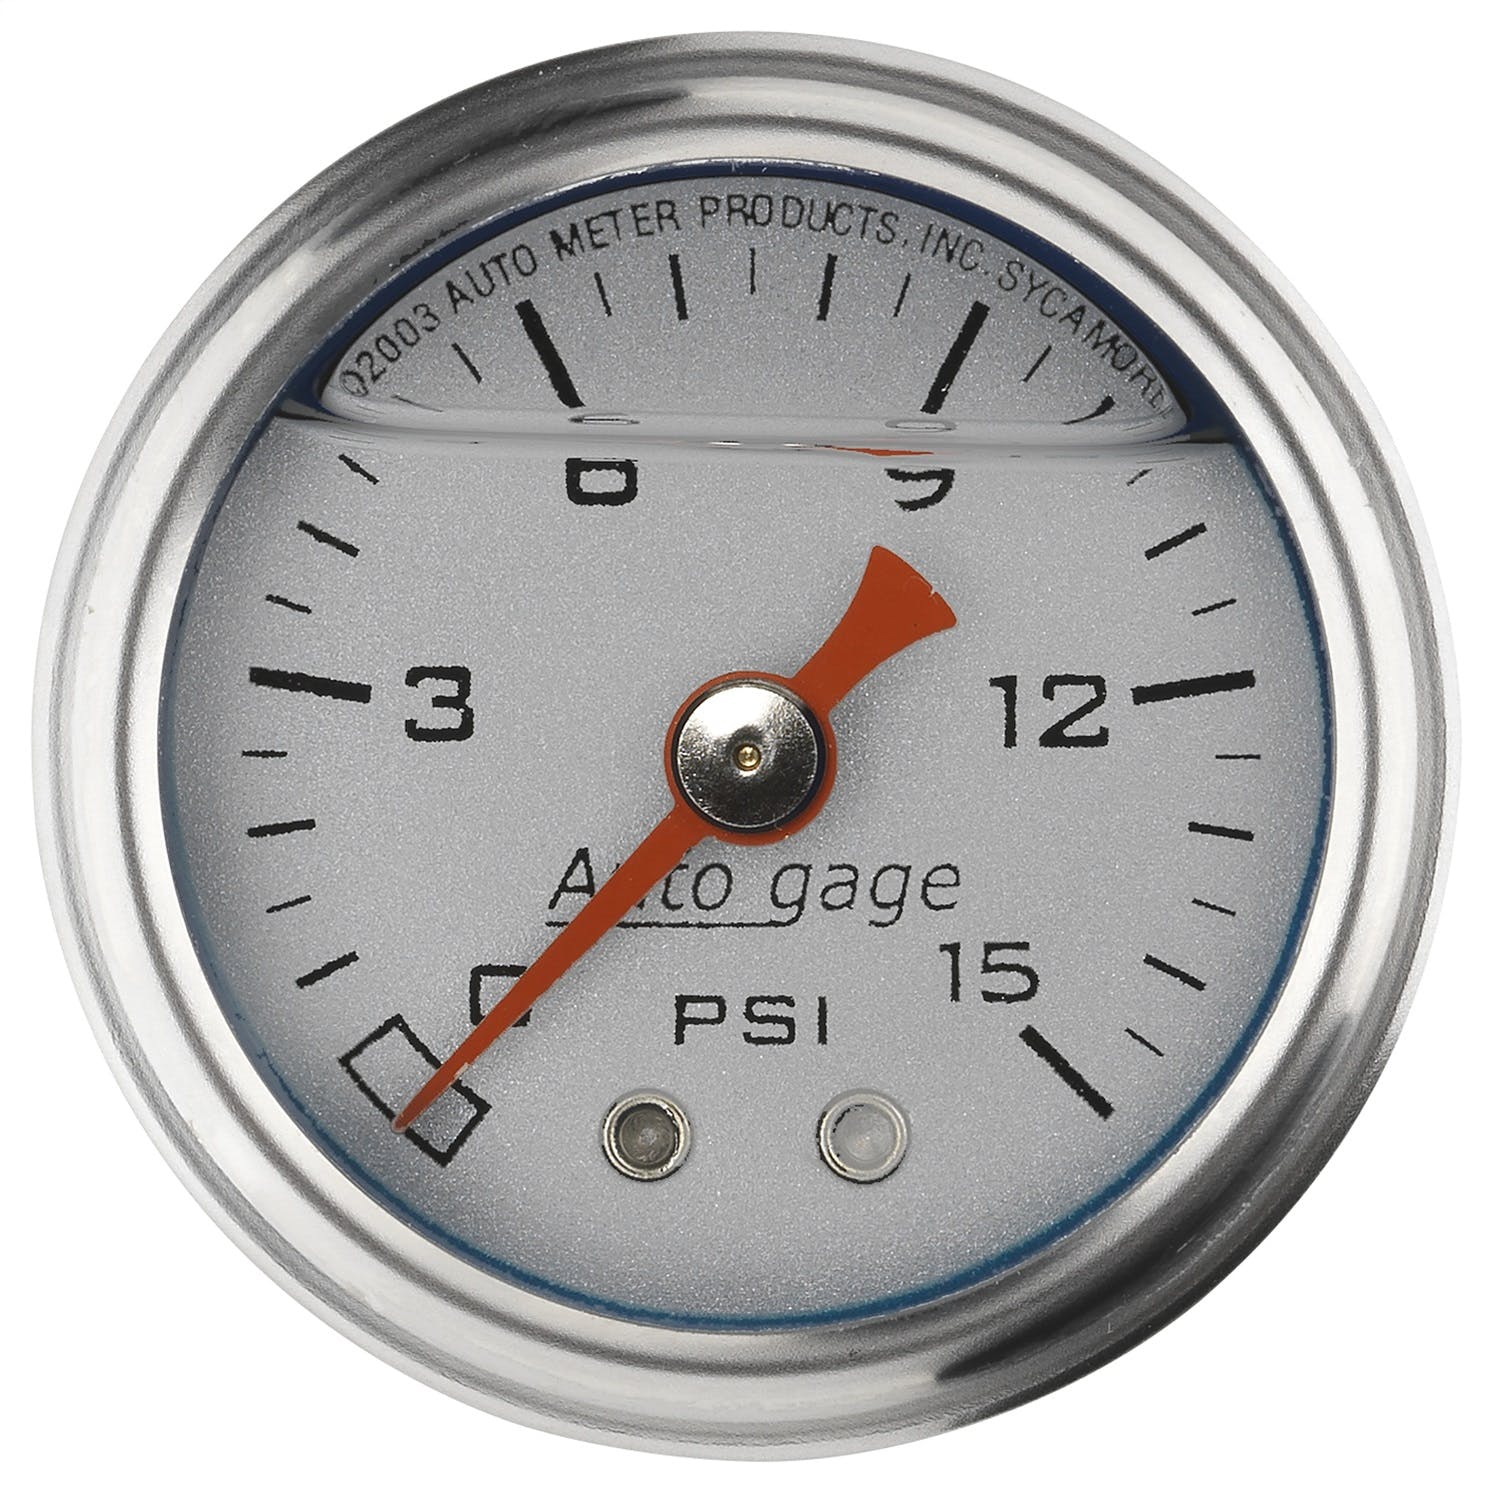 AutoMeter Products 2178 Auto Gage Series Dampened-Movement Pressure Gauge (Silver, 0-15 PSI, 1-1/2 in.)